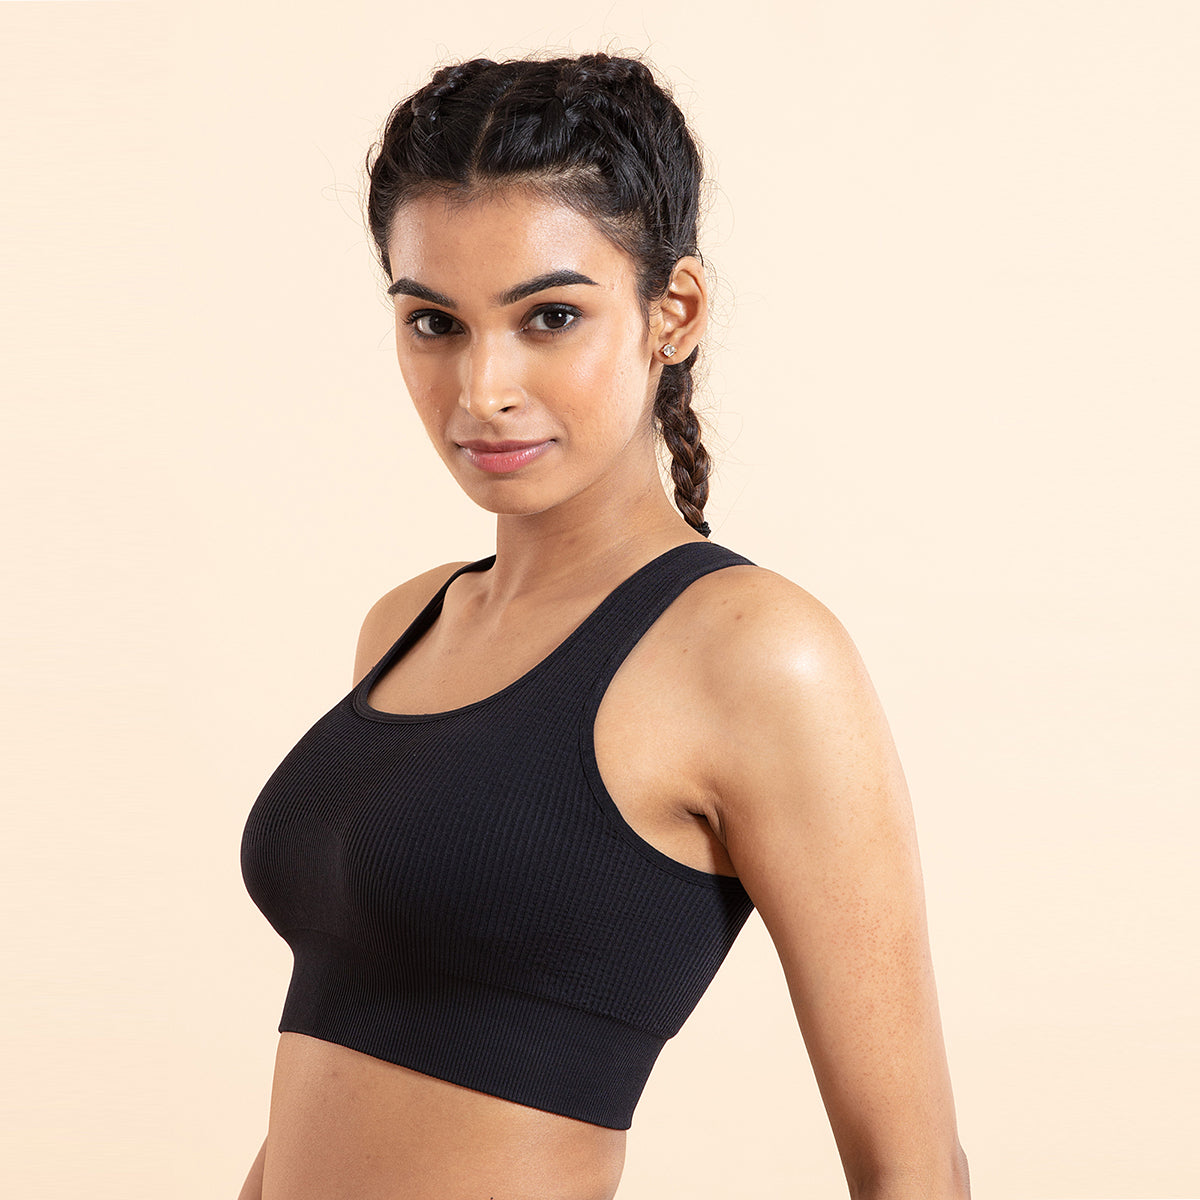 Nykd All Day Seamless Sports Bra with removable cookies- NYK096 Jet Bl –  Nykd by Nykaa